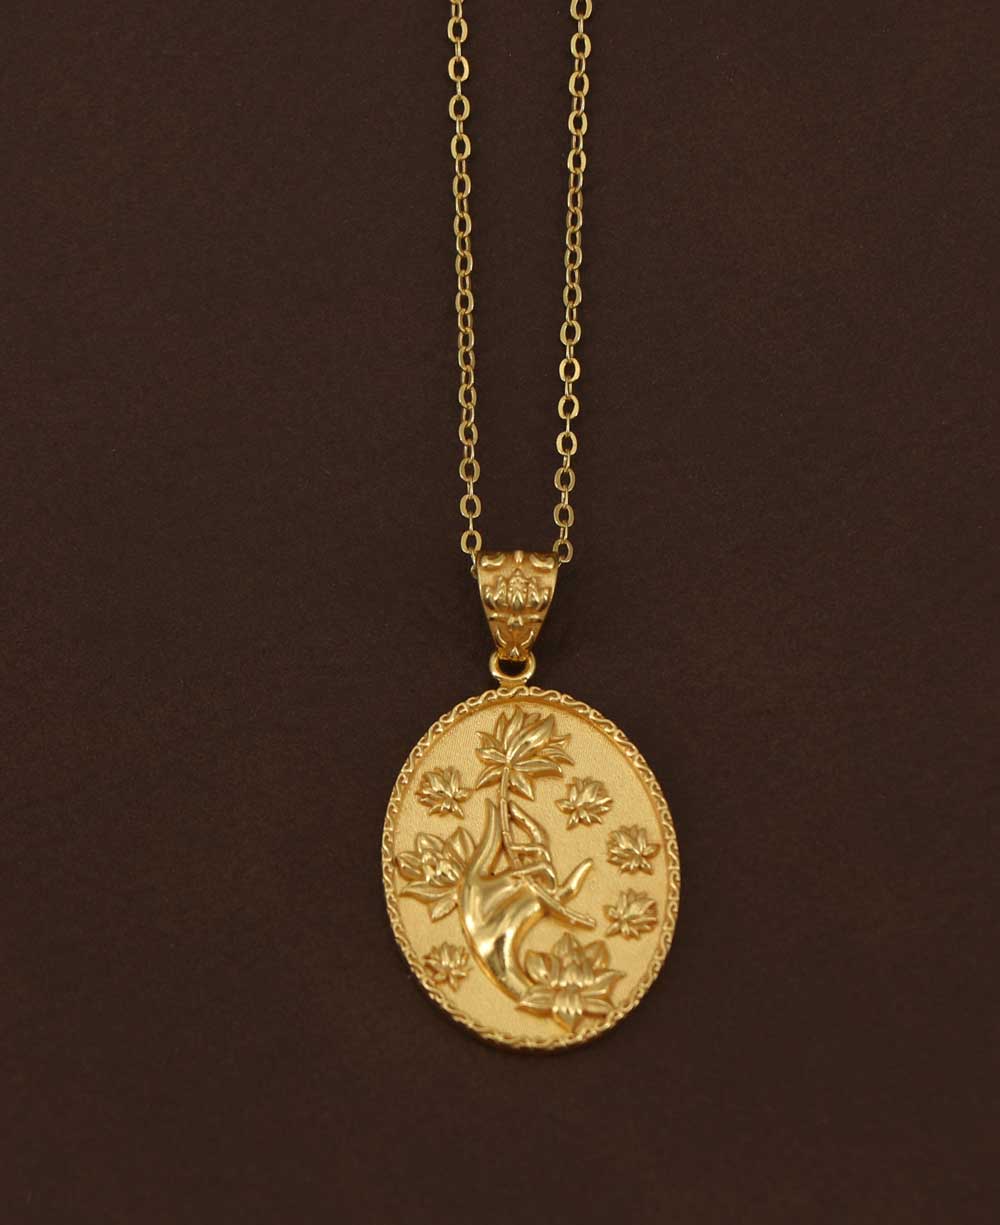 Mudra Hand and Lotus Flower Pendant Necklace - Necklaces